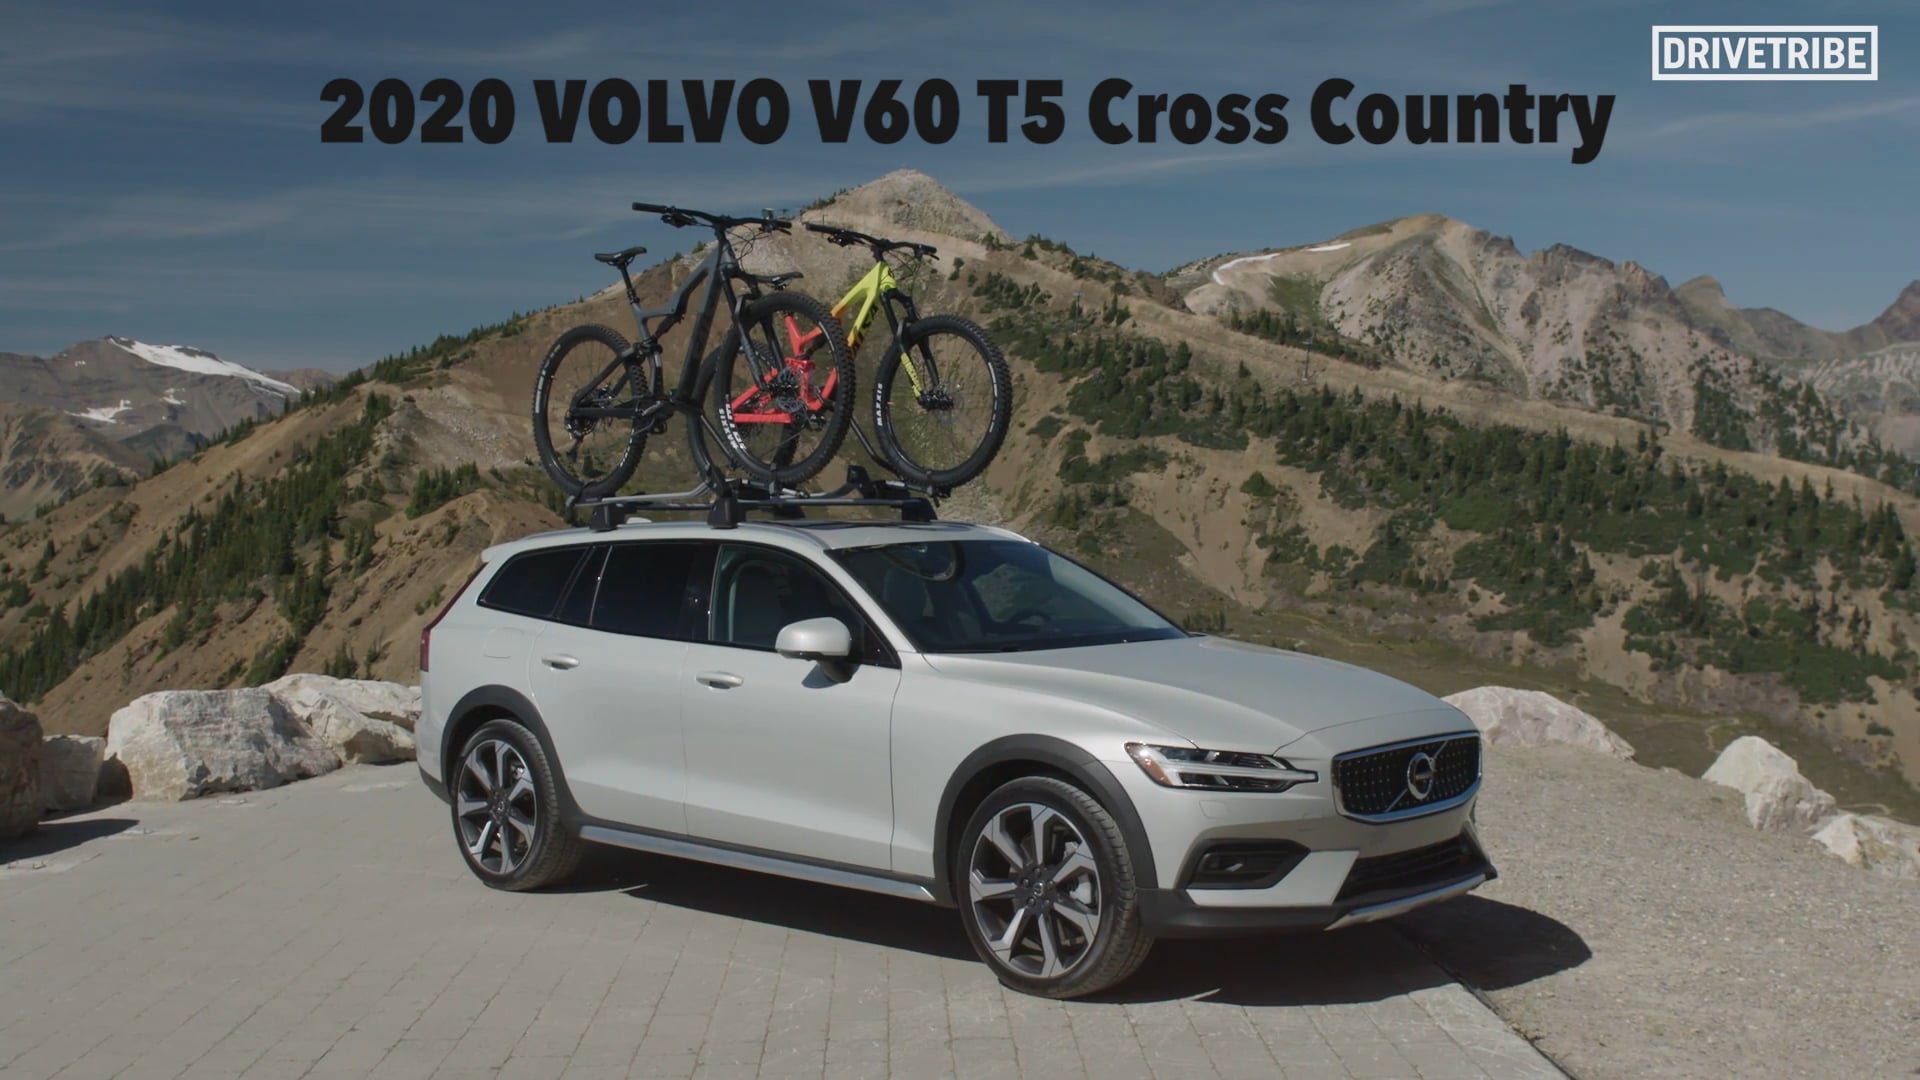 2020 Volvo V60 T5 Cross Country Test Drive in Canadian Rockies